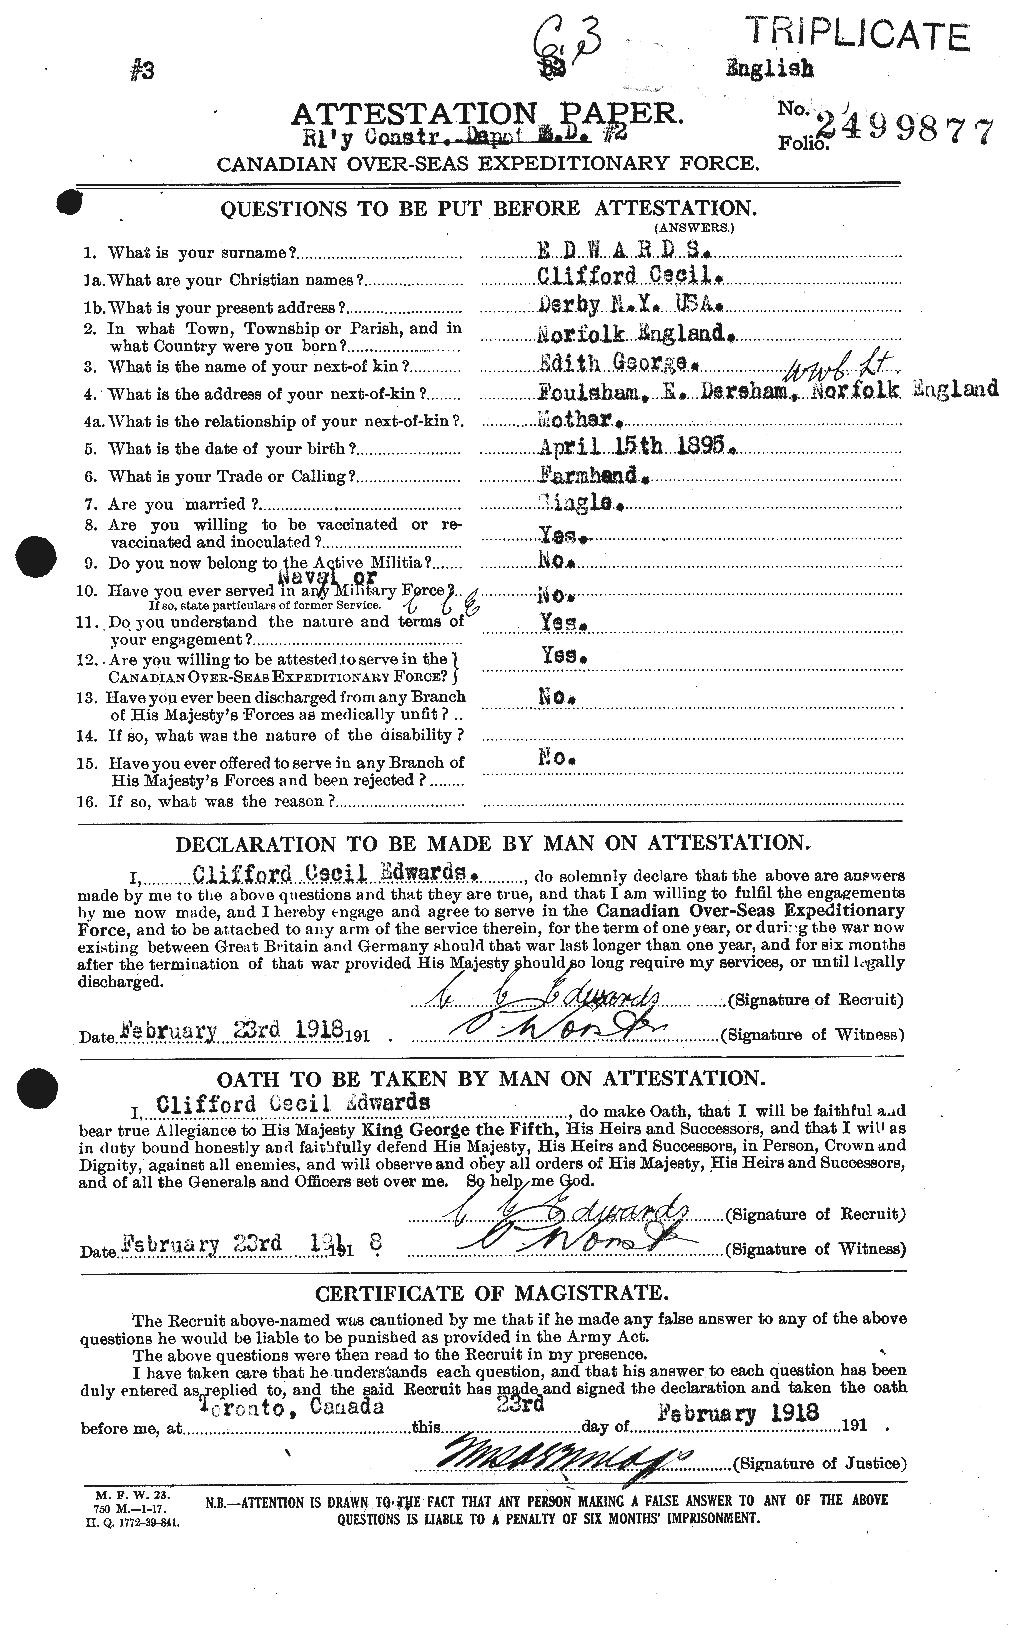 Personnel Records of the First World War - CEF 307859a